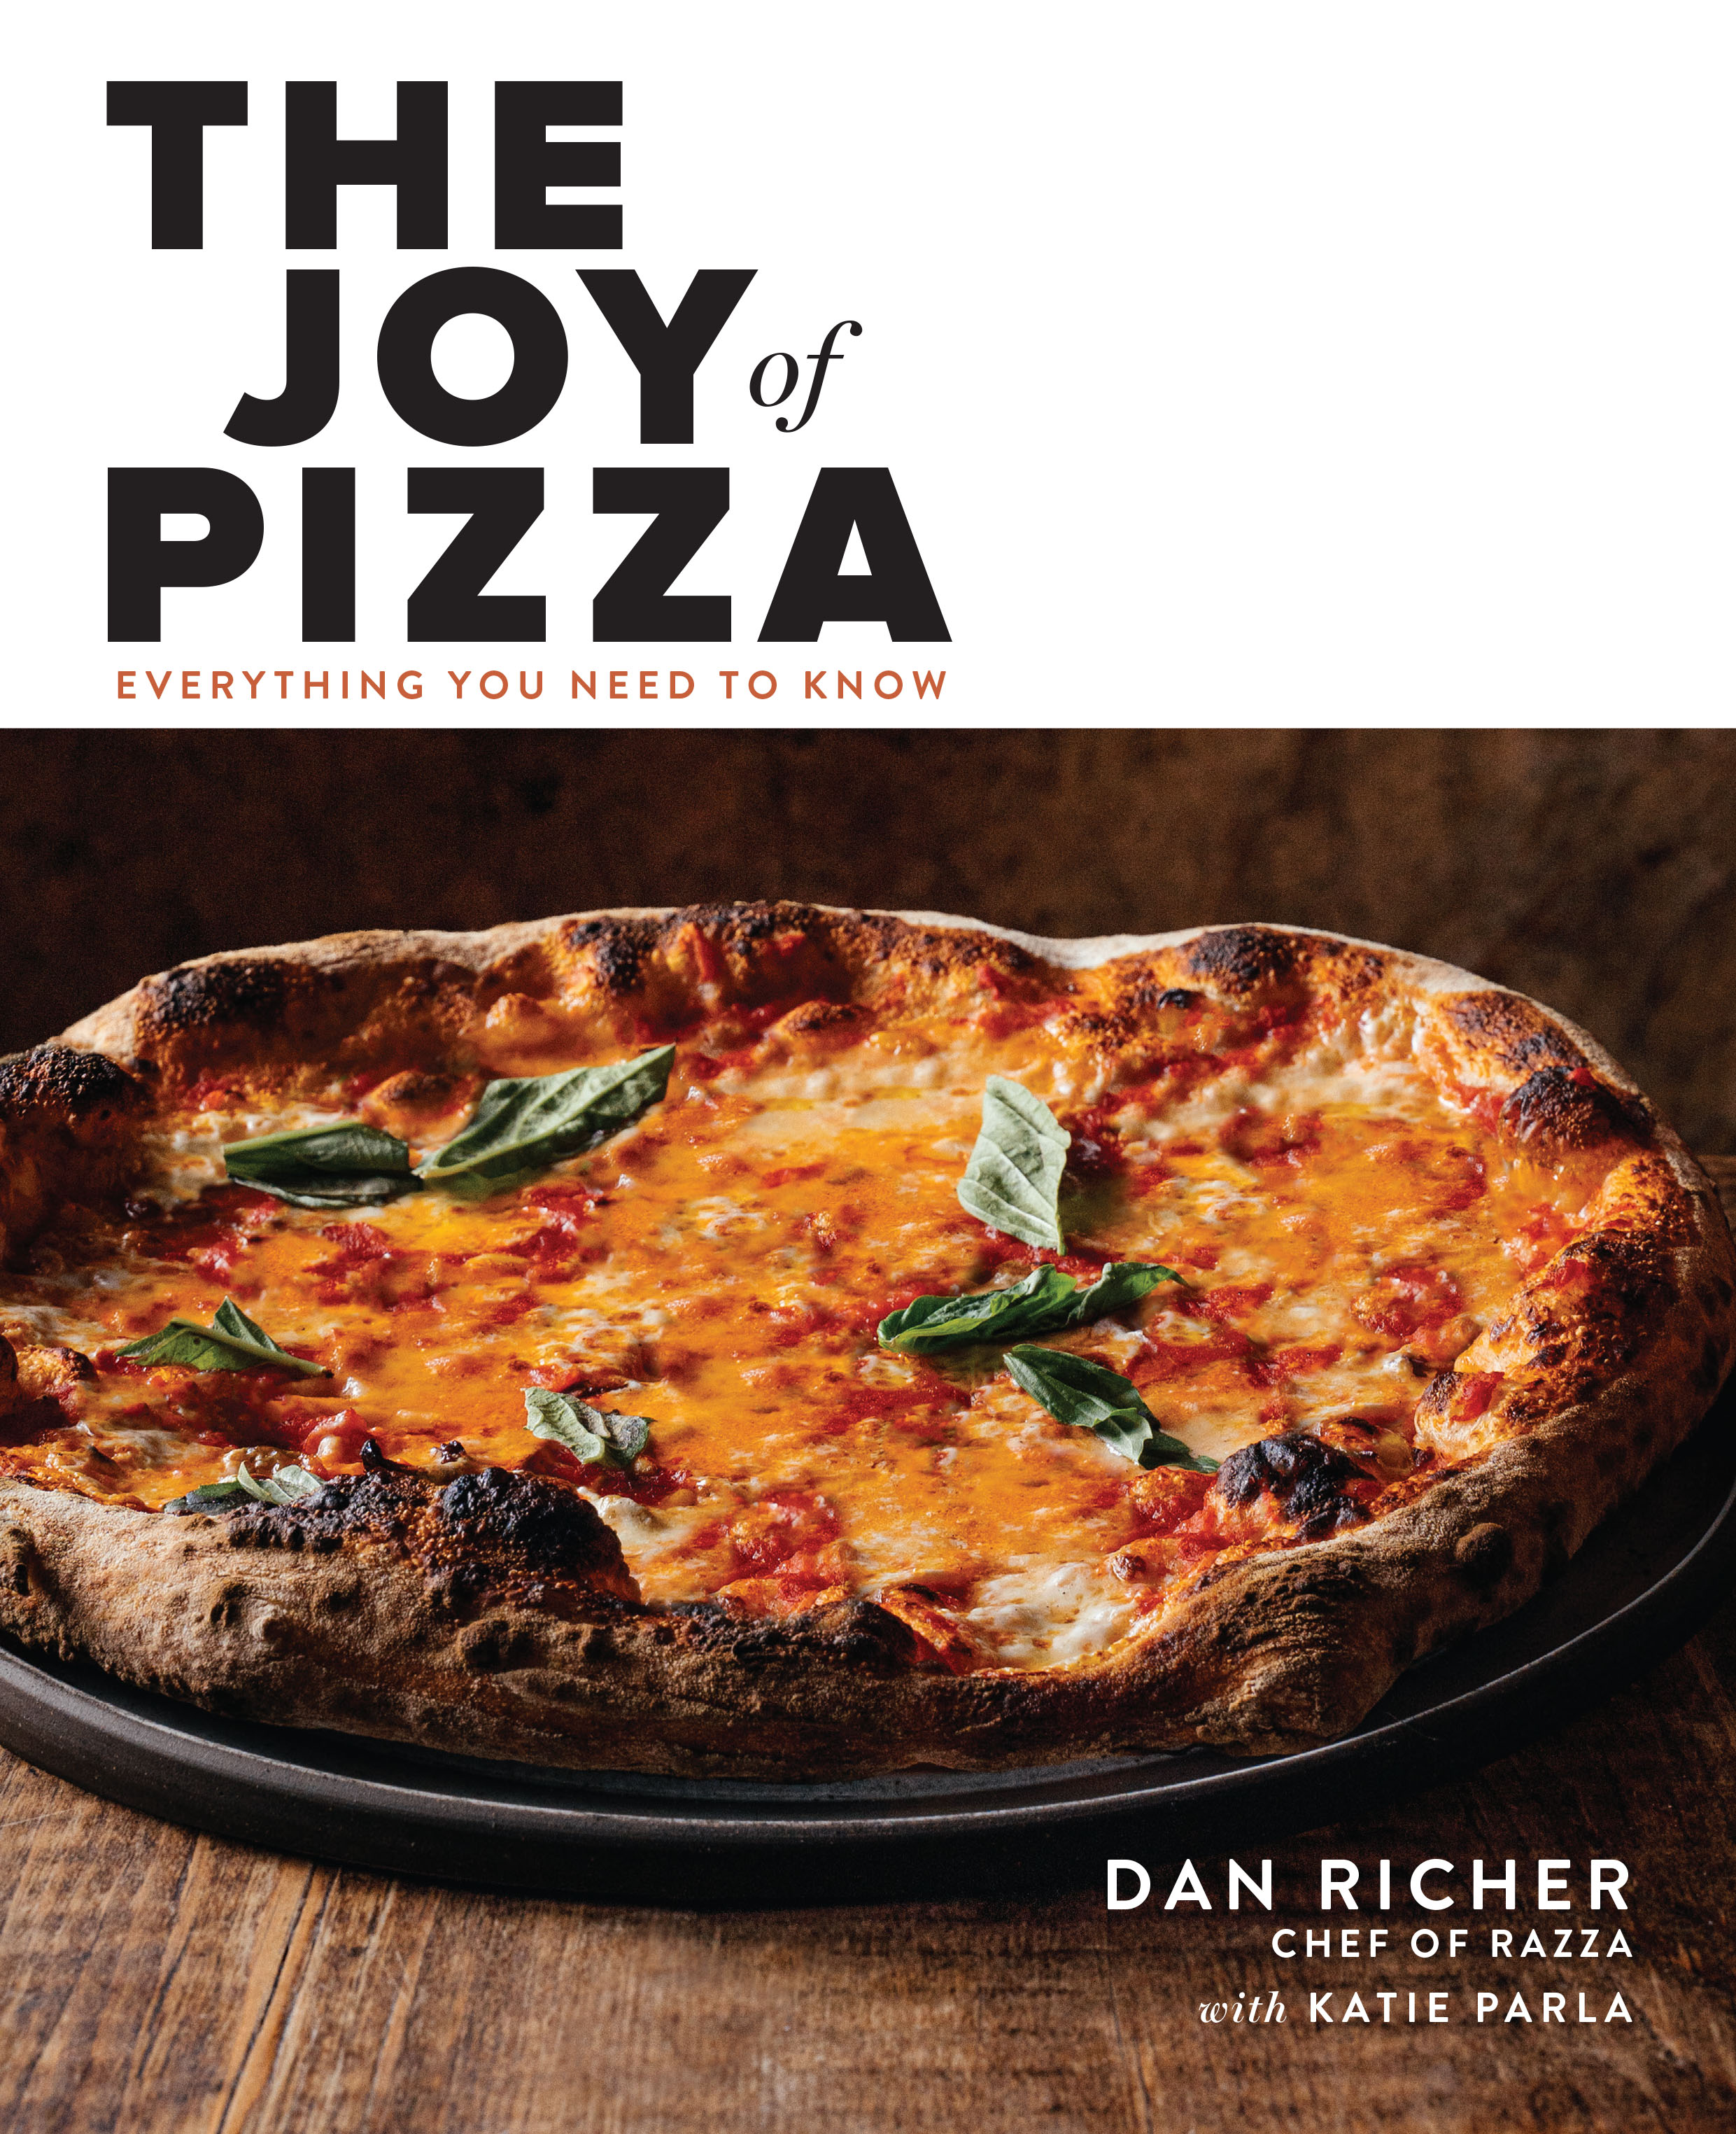 "The Joy of Pizza" is out this week